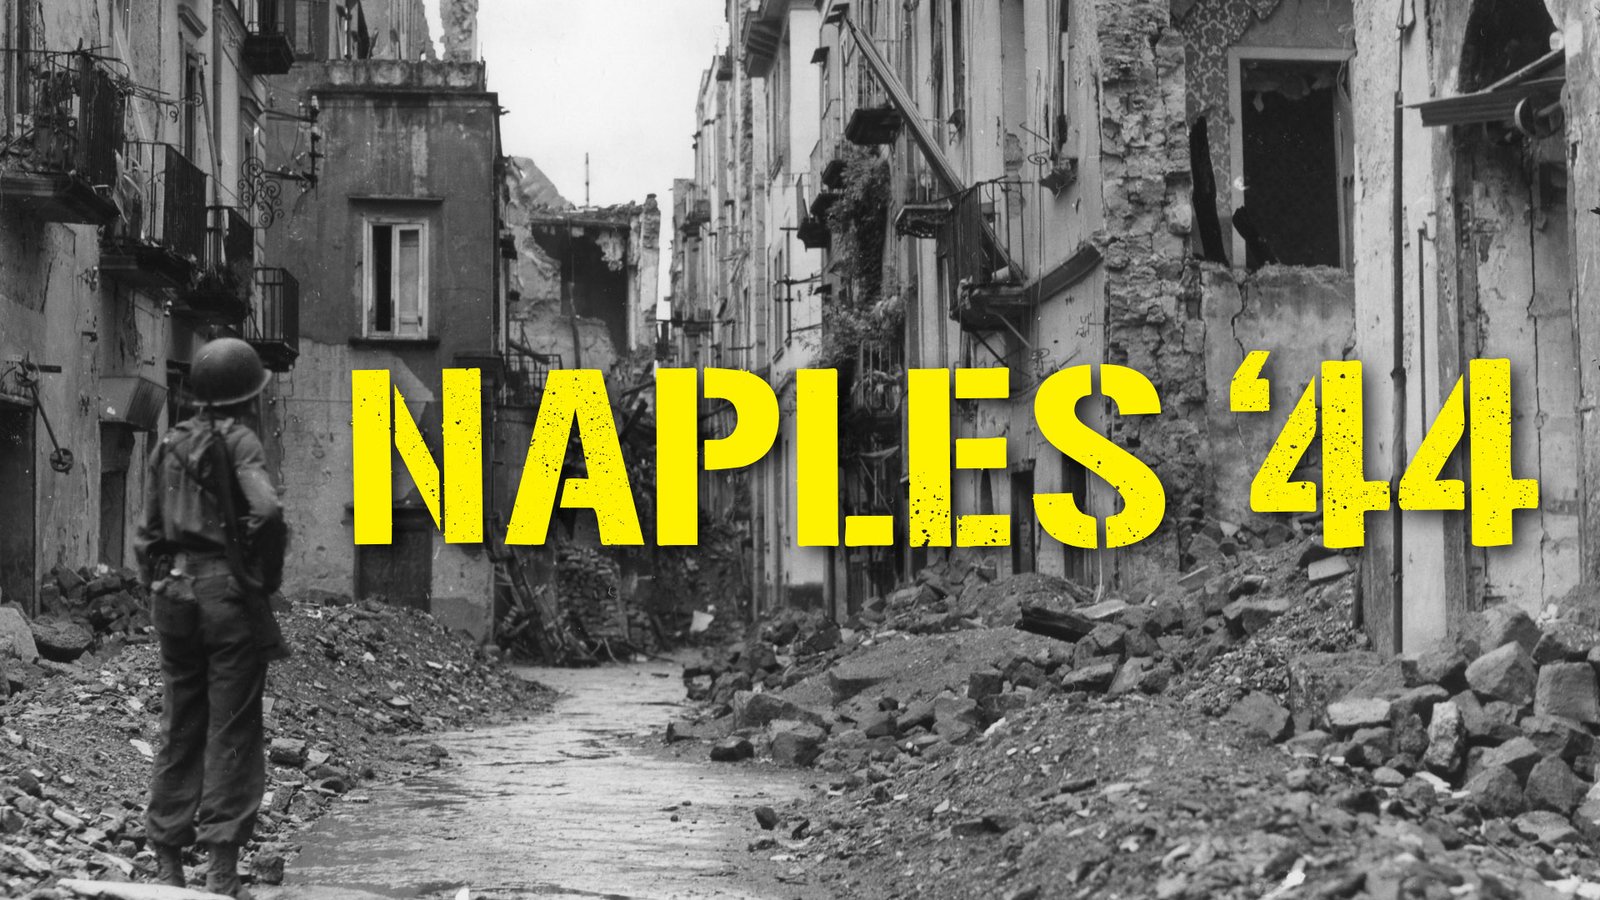 Naples ’44 - A Re-Imagining of a British Soldier's Memoirs